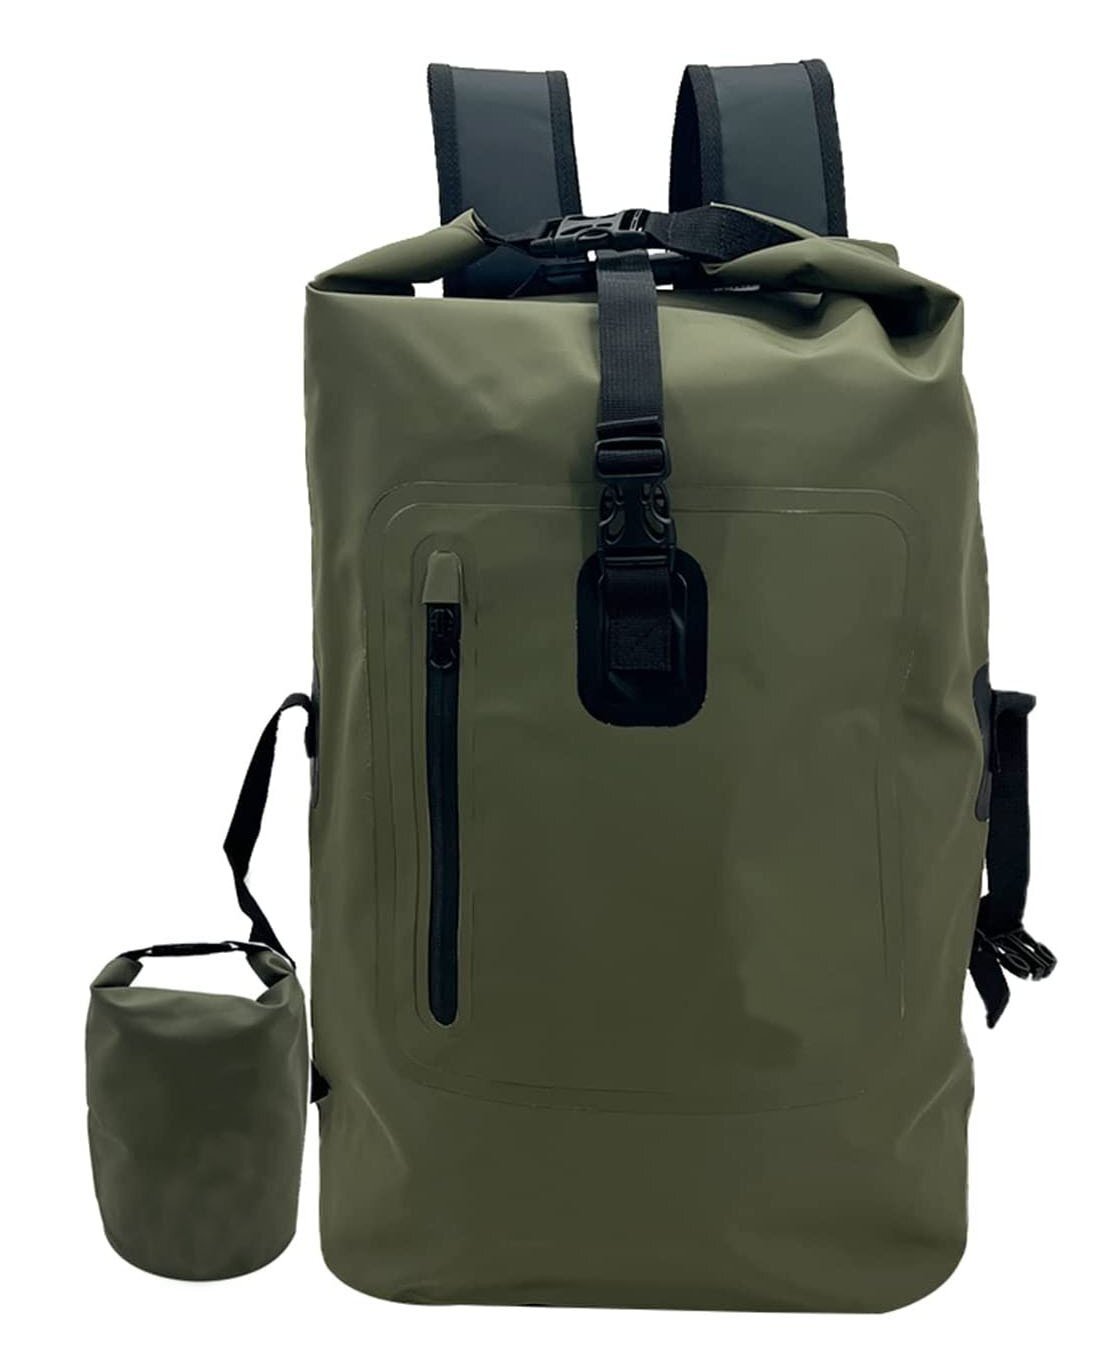 Waterproof Backpack Dry Bag 25L Roll Top Heavy Duty Waterproof Closure with Cushioned Padded 